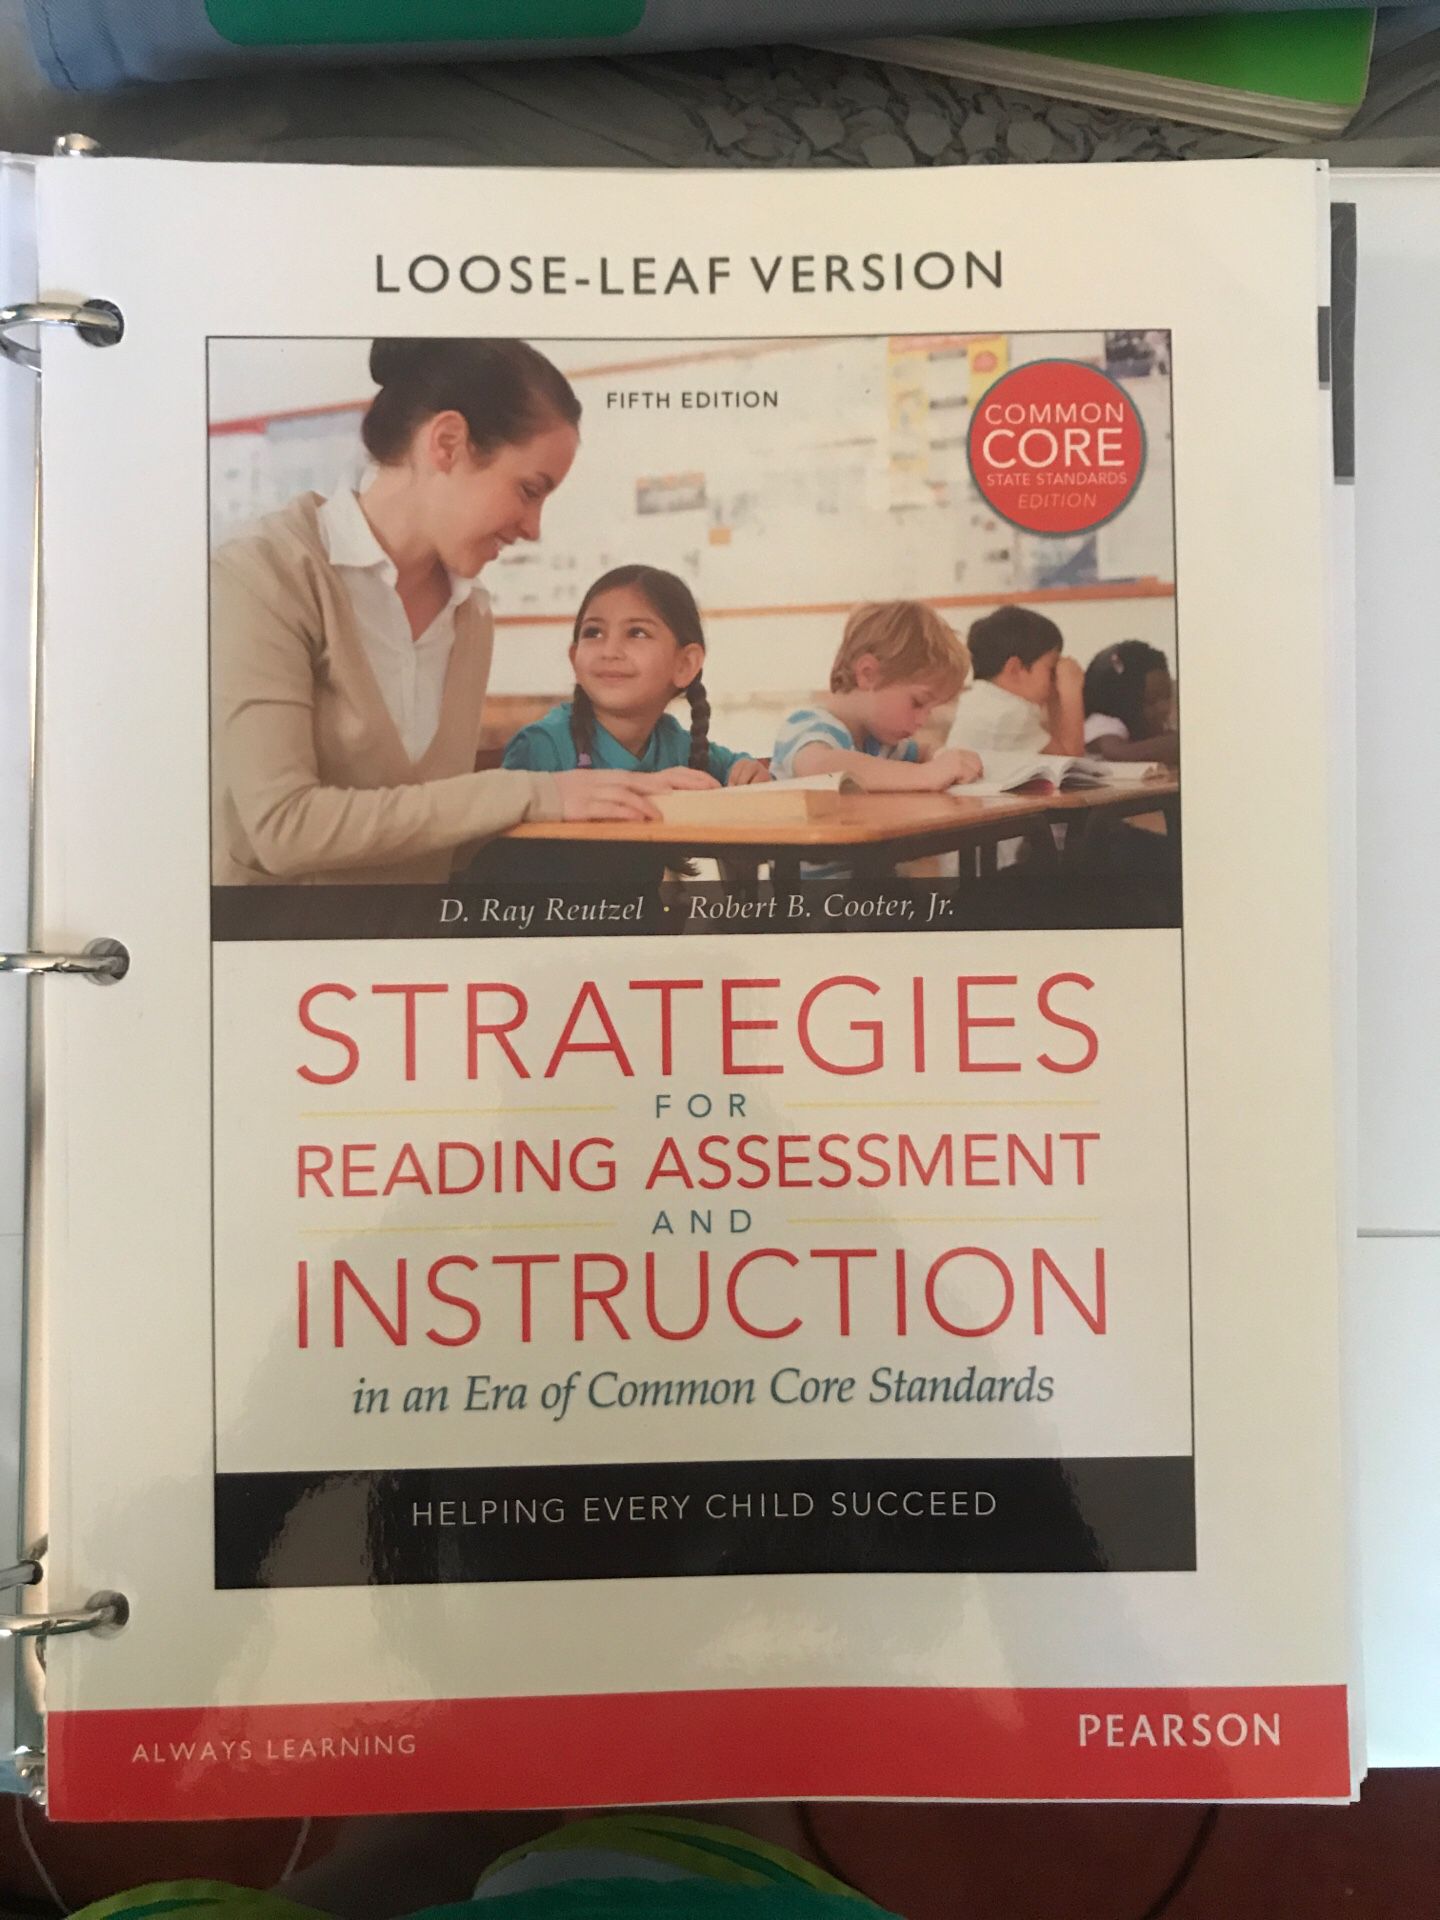 Strategies for reading assessment and instruction